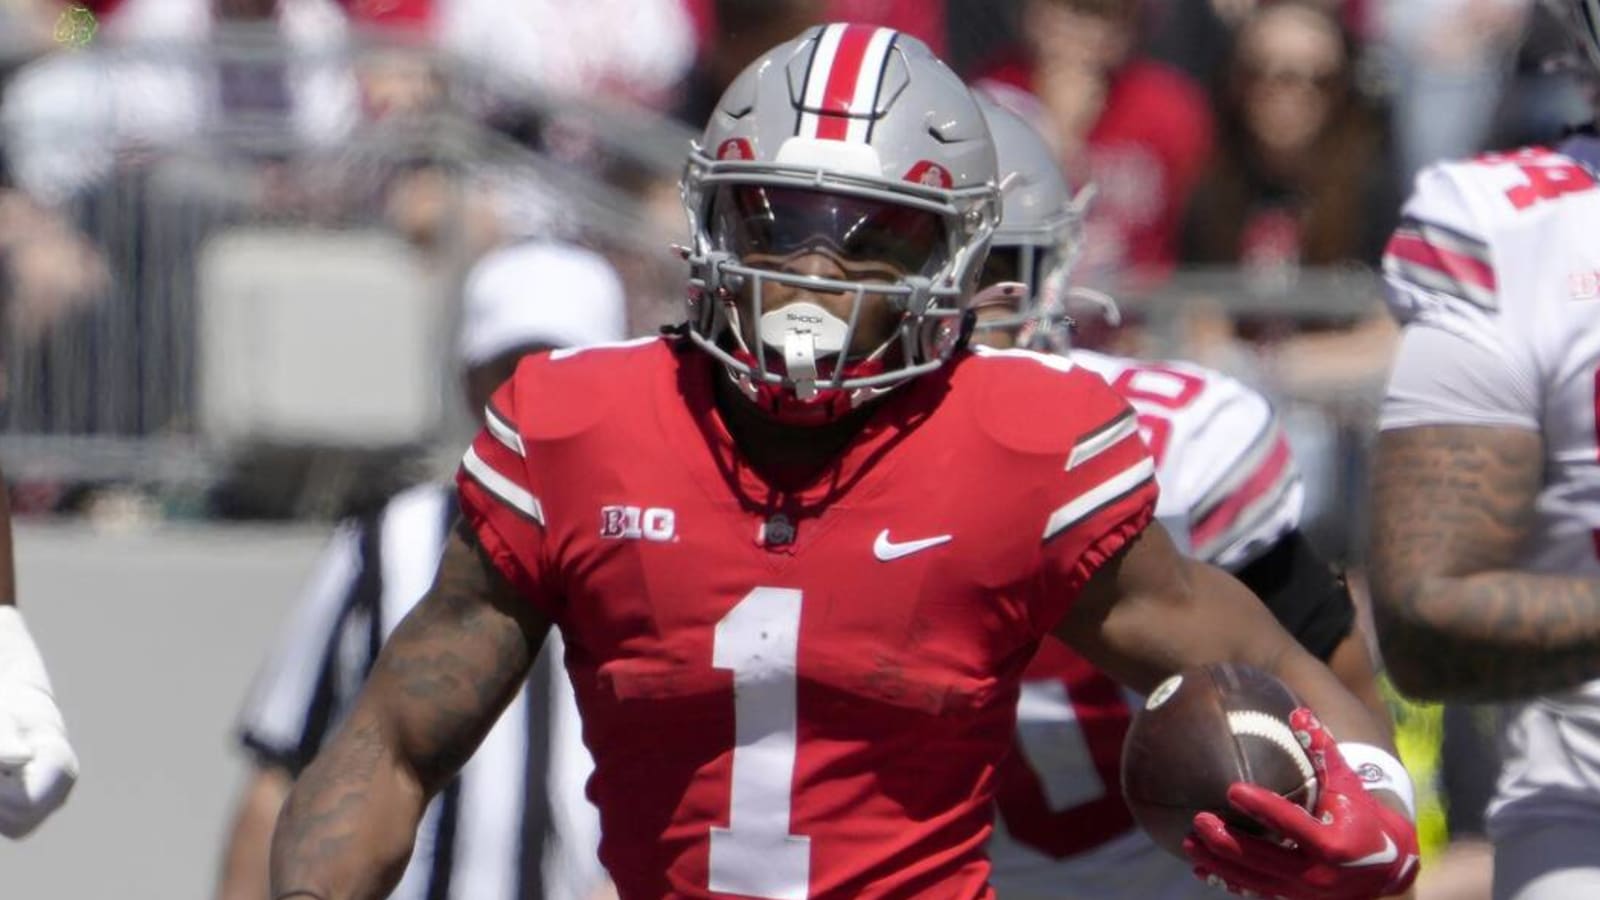  Current Ohio State Star Football Player Gives Back To His High School In An Incredible Way